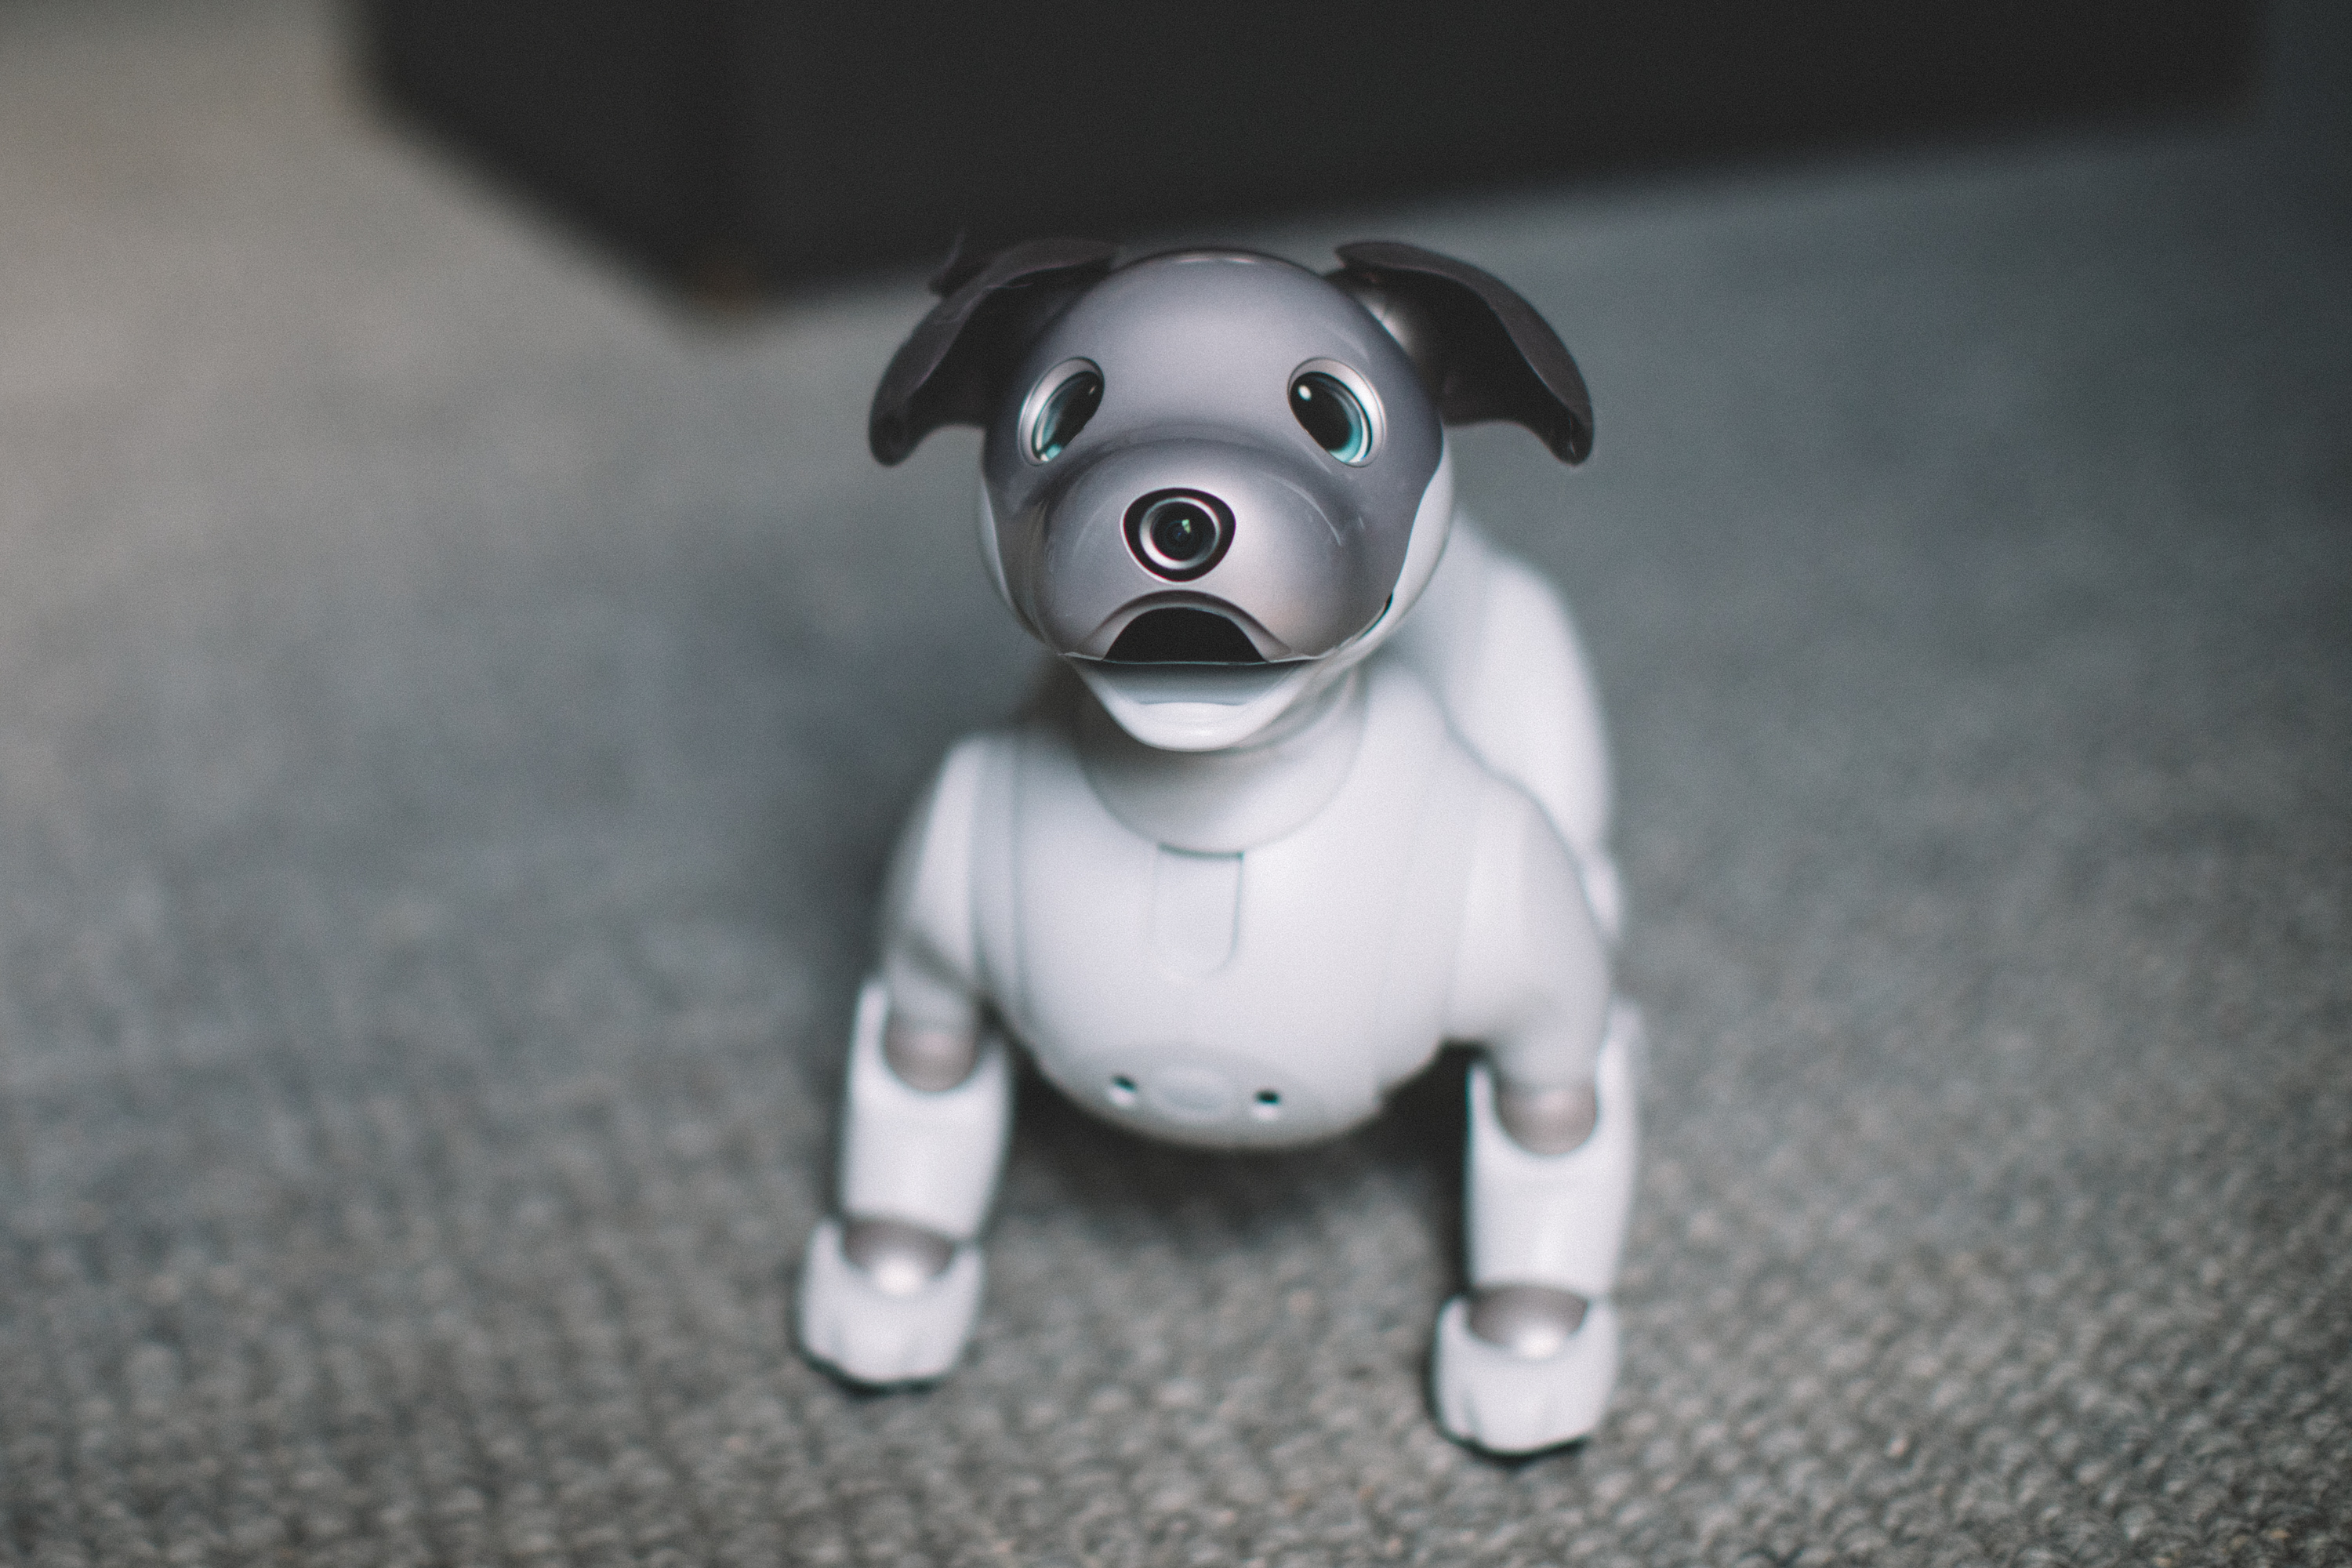 Up close and hands-on with Sony's Aibo | TechCrunch